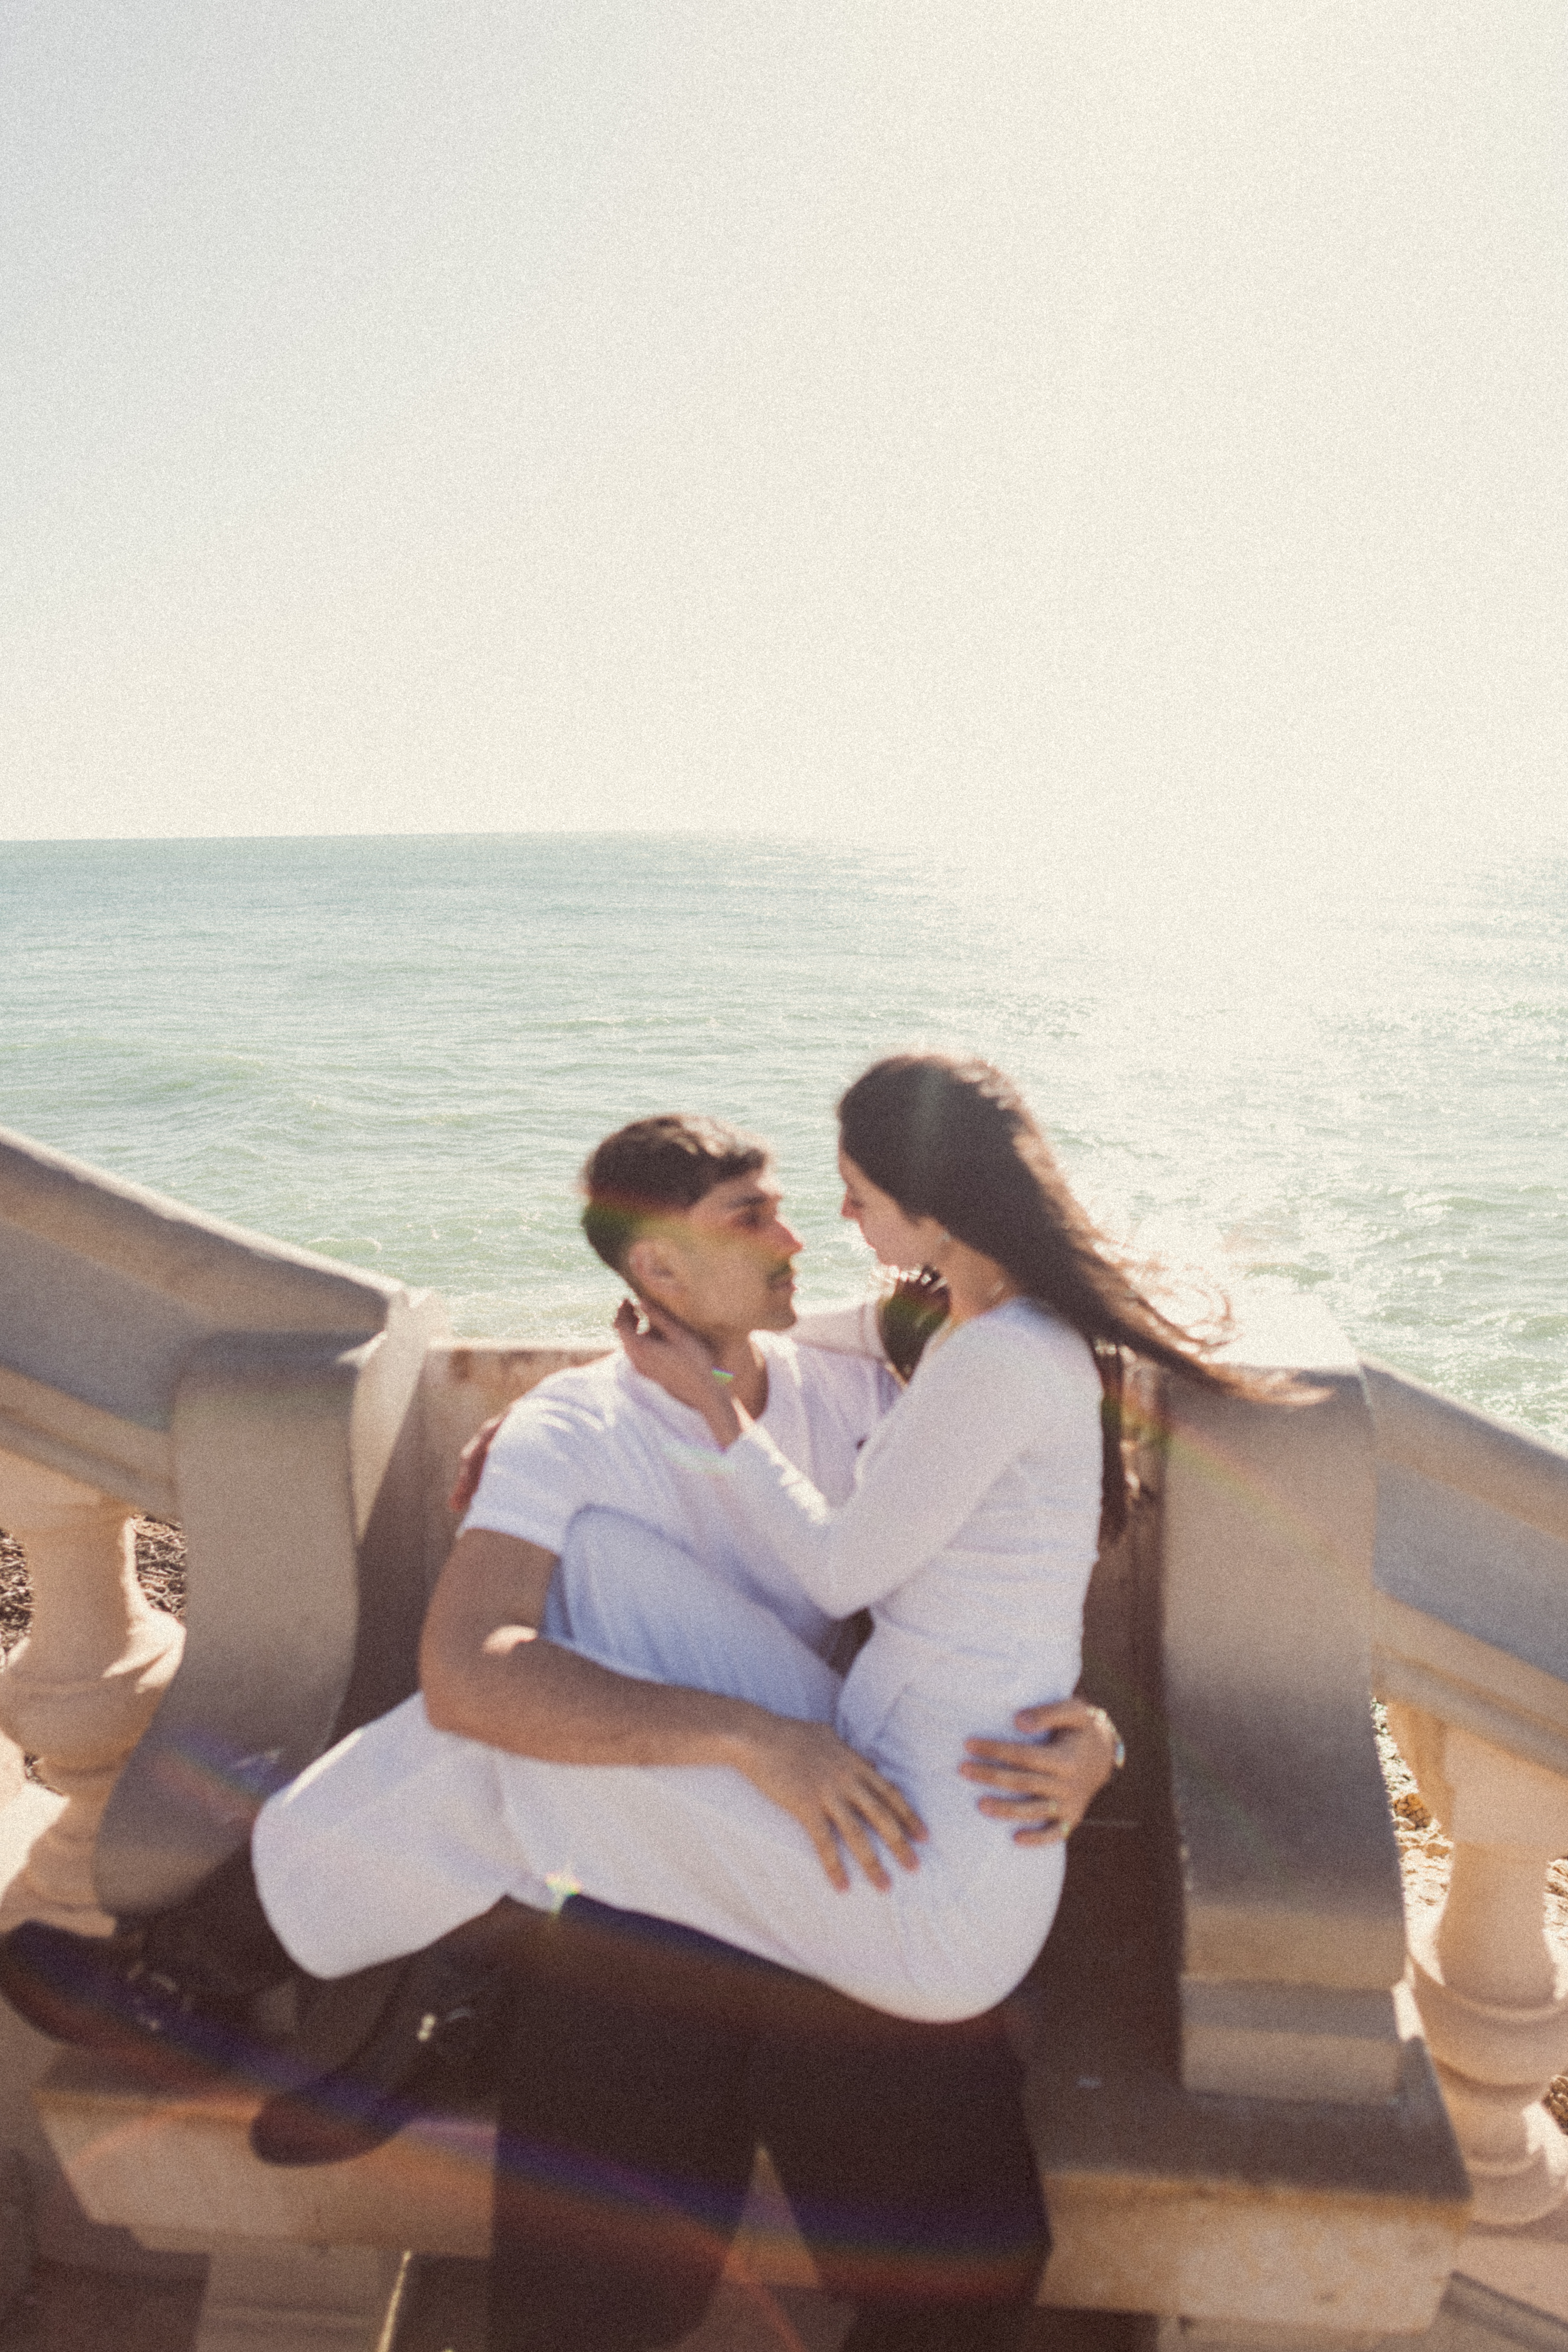 Artistic Vision in Sitges: Editorial Couple Photography